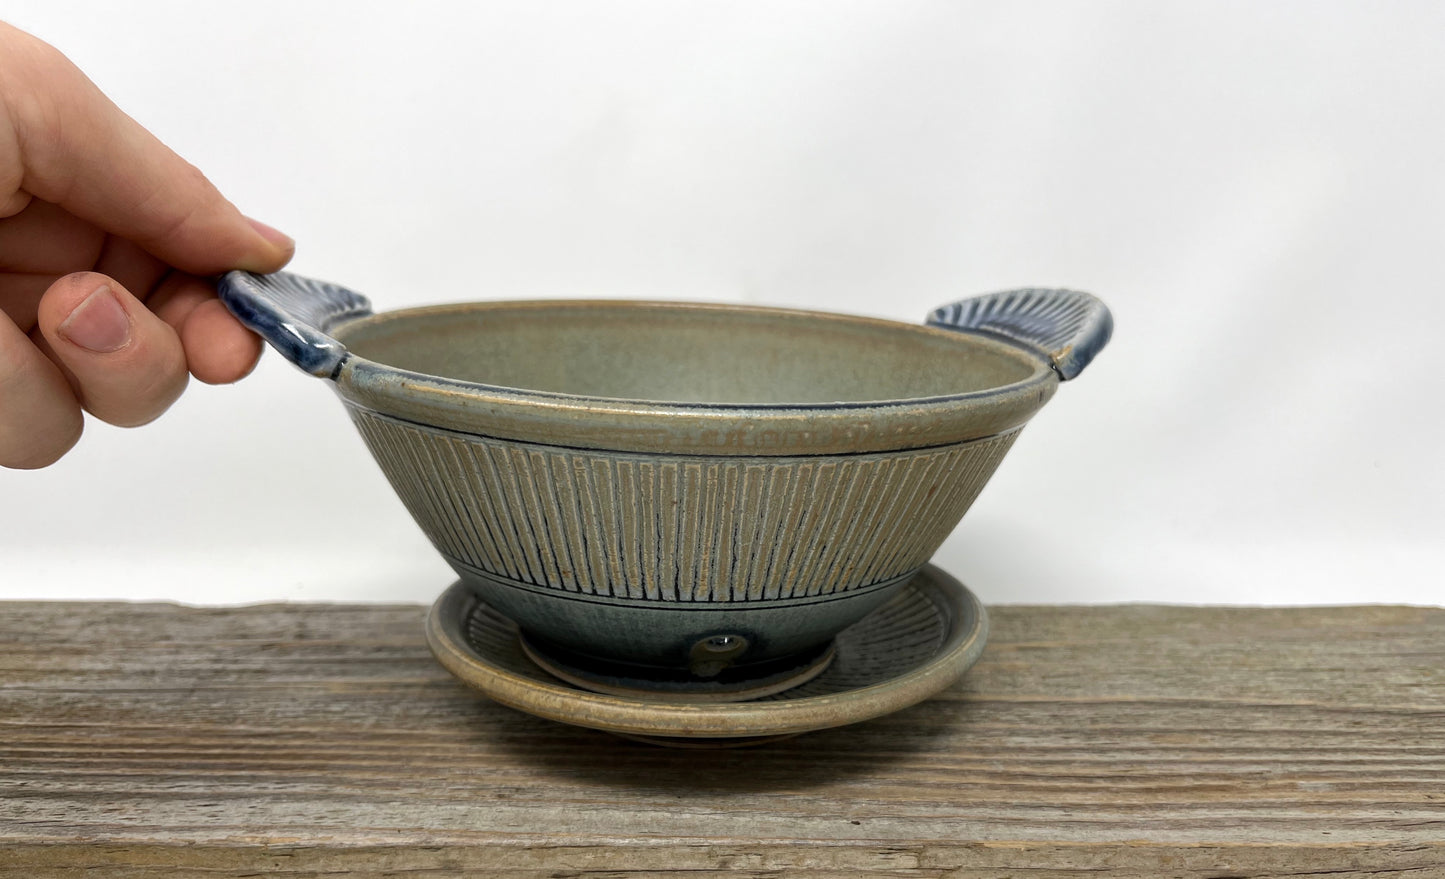 Berry Bowl with Pinched Handles, Blue Ridge Glaze